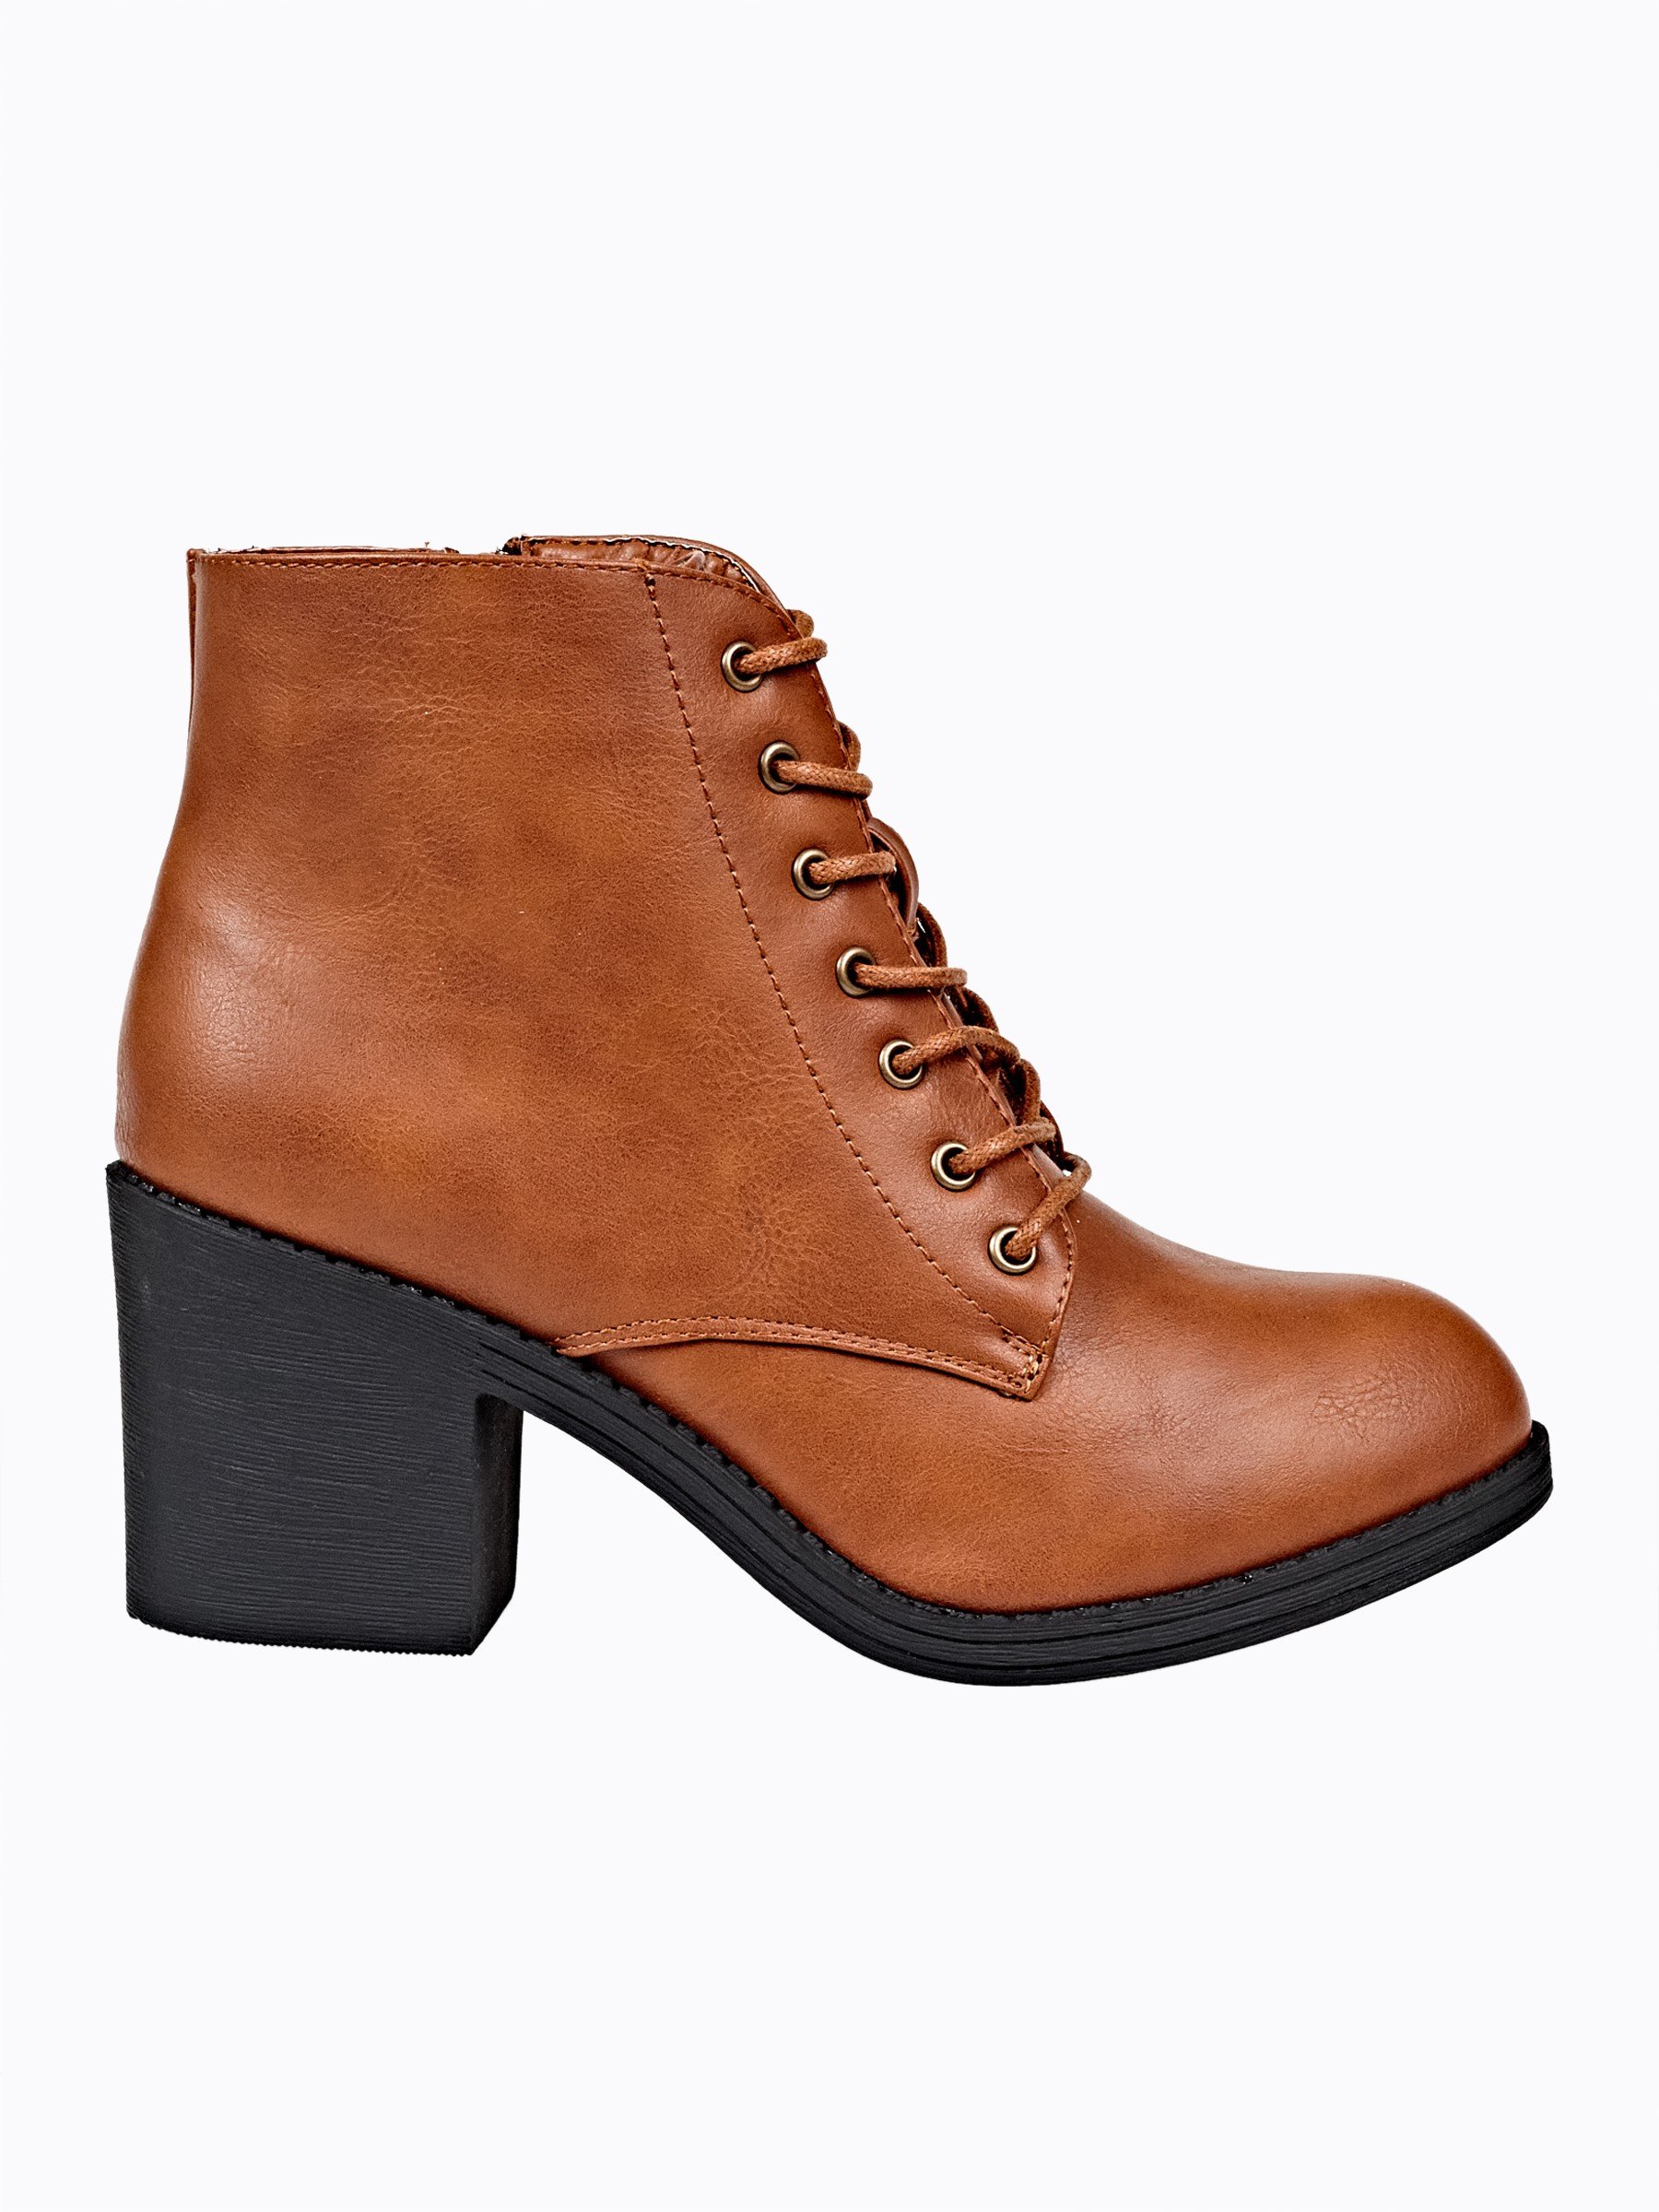 Lace-up ankle boots in leather with heel, dark brown, Tamaris | La Redoute